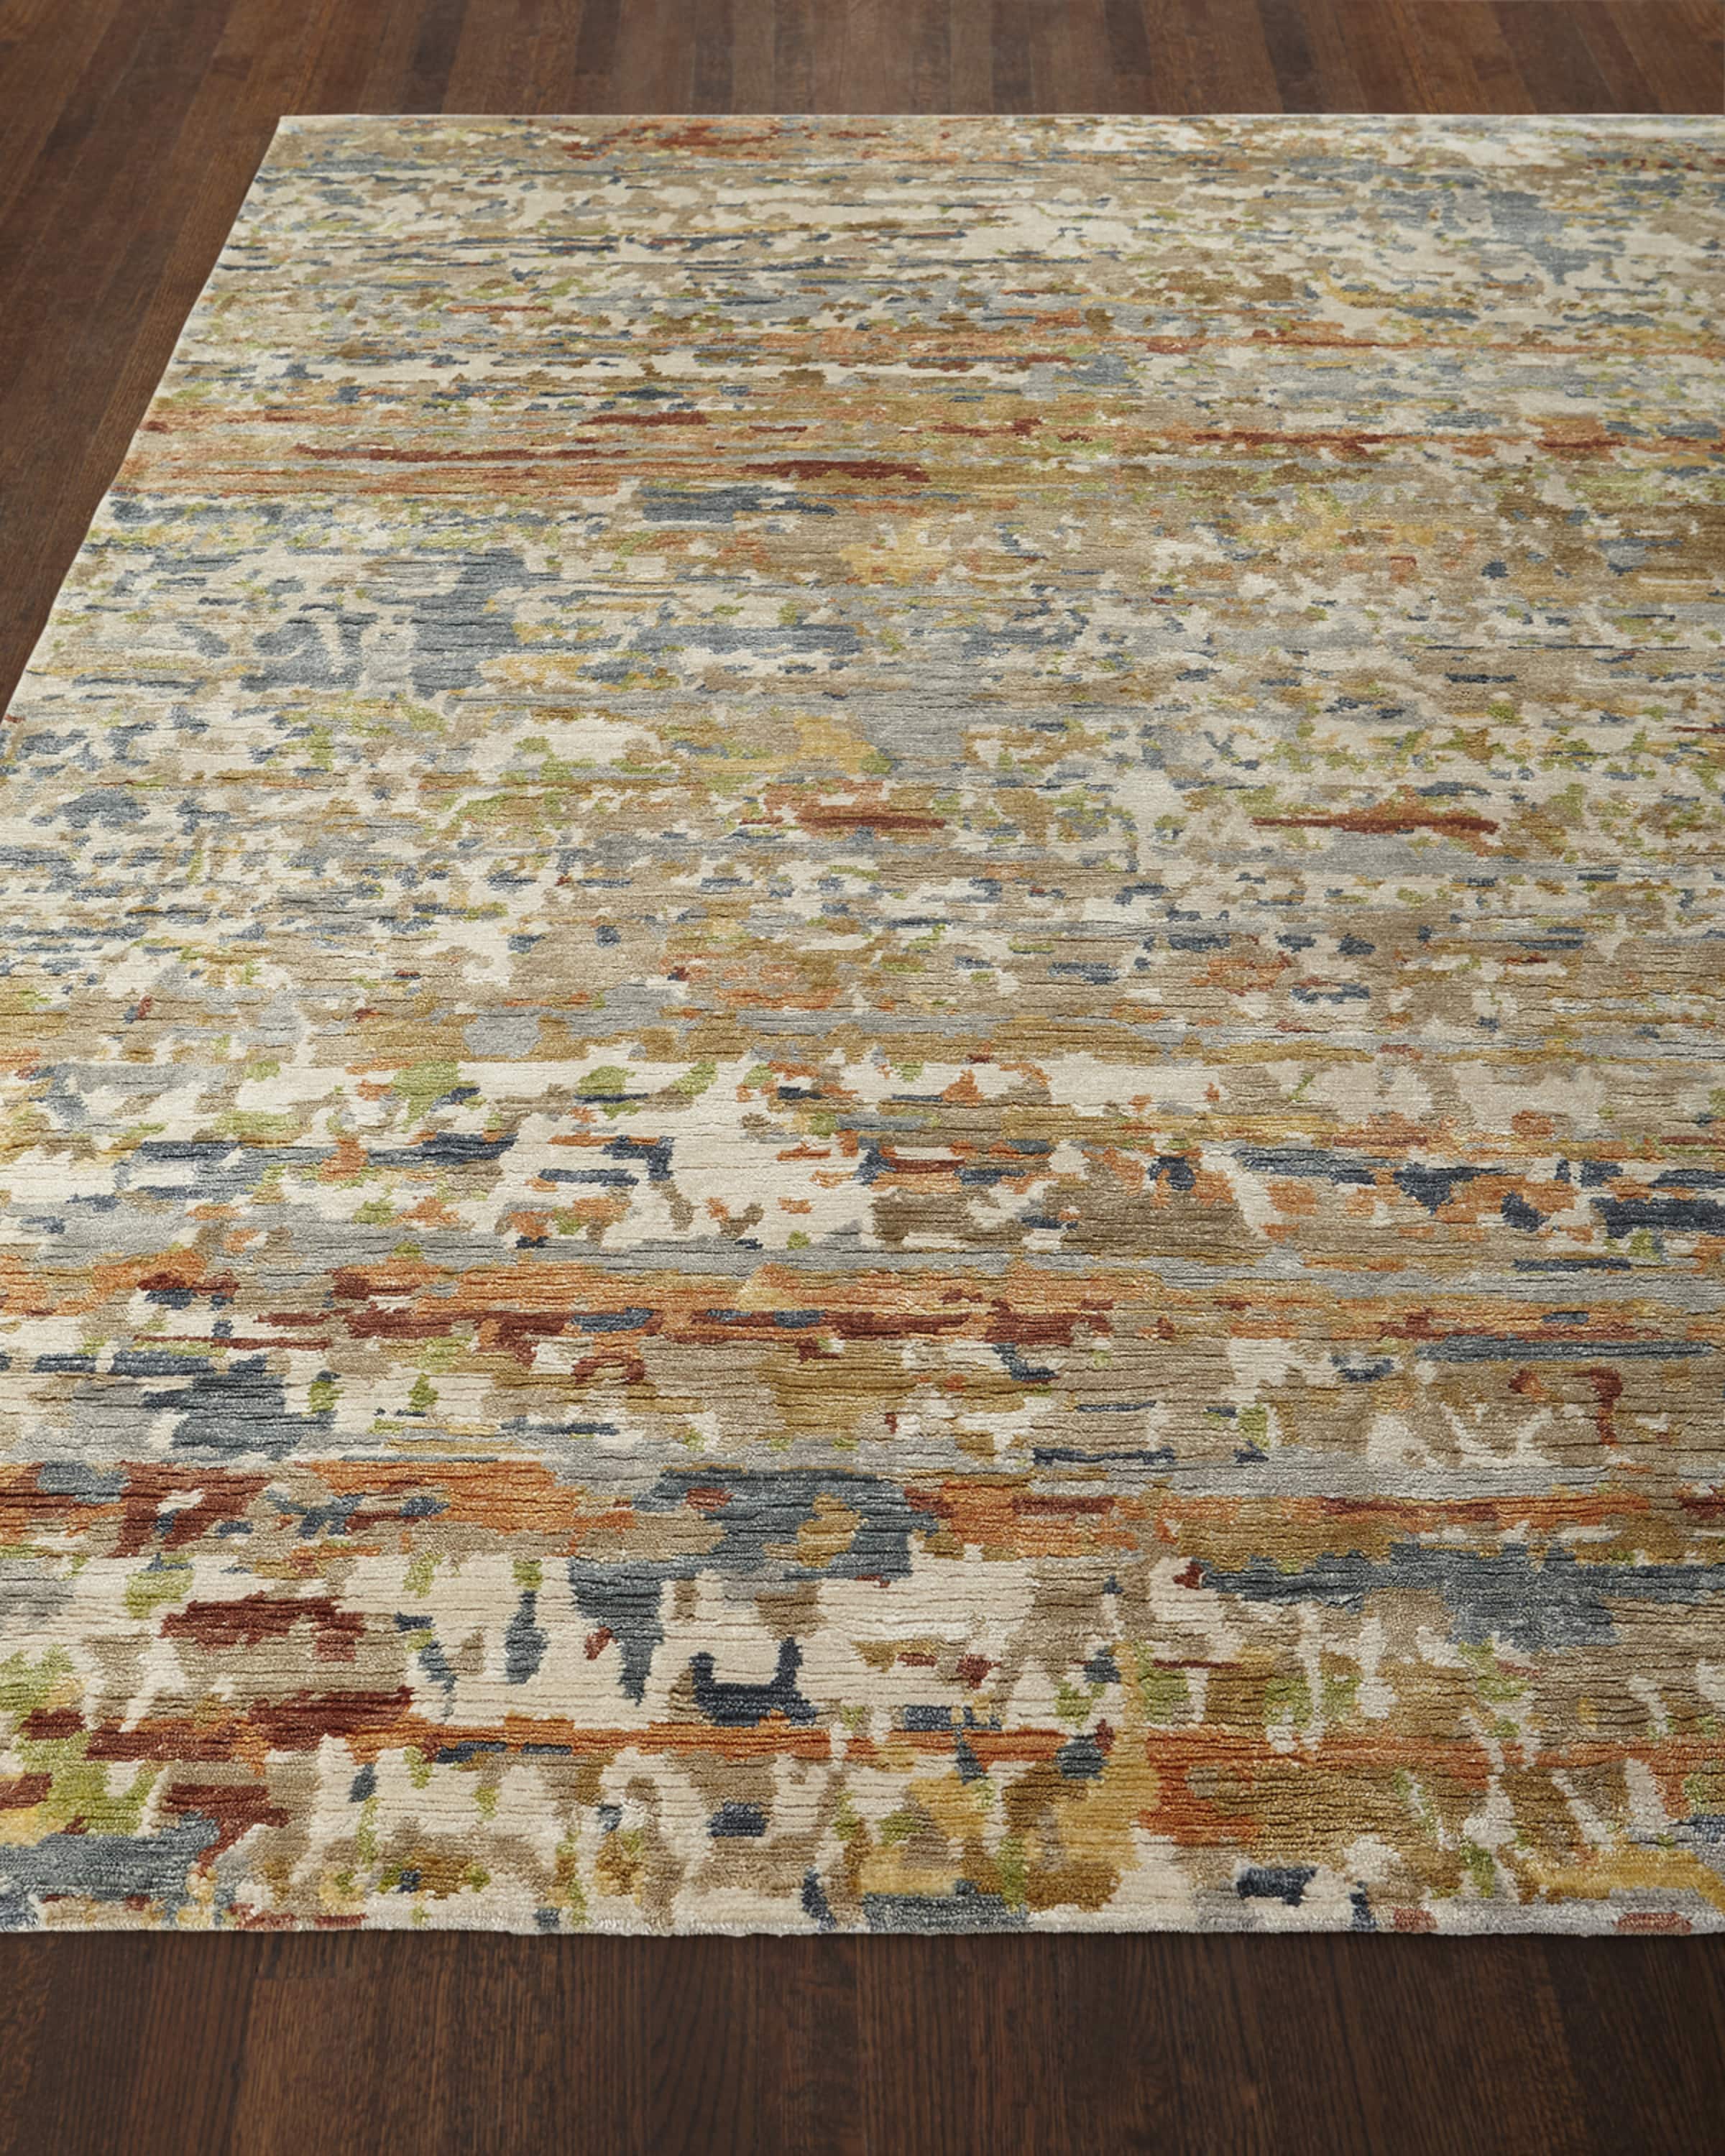 Jeffrey Hand-Knotted Area Rug, 9' x 12'